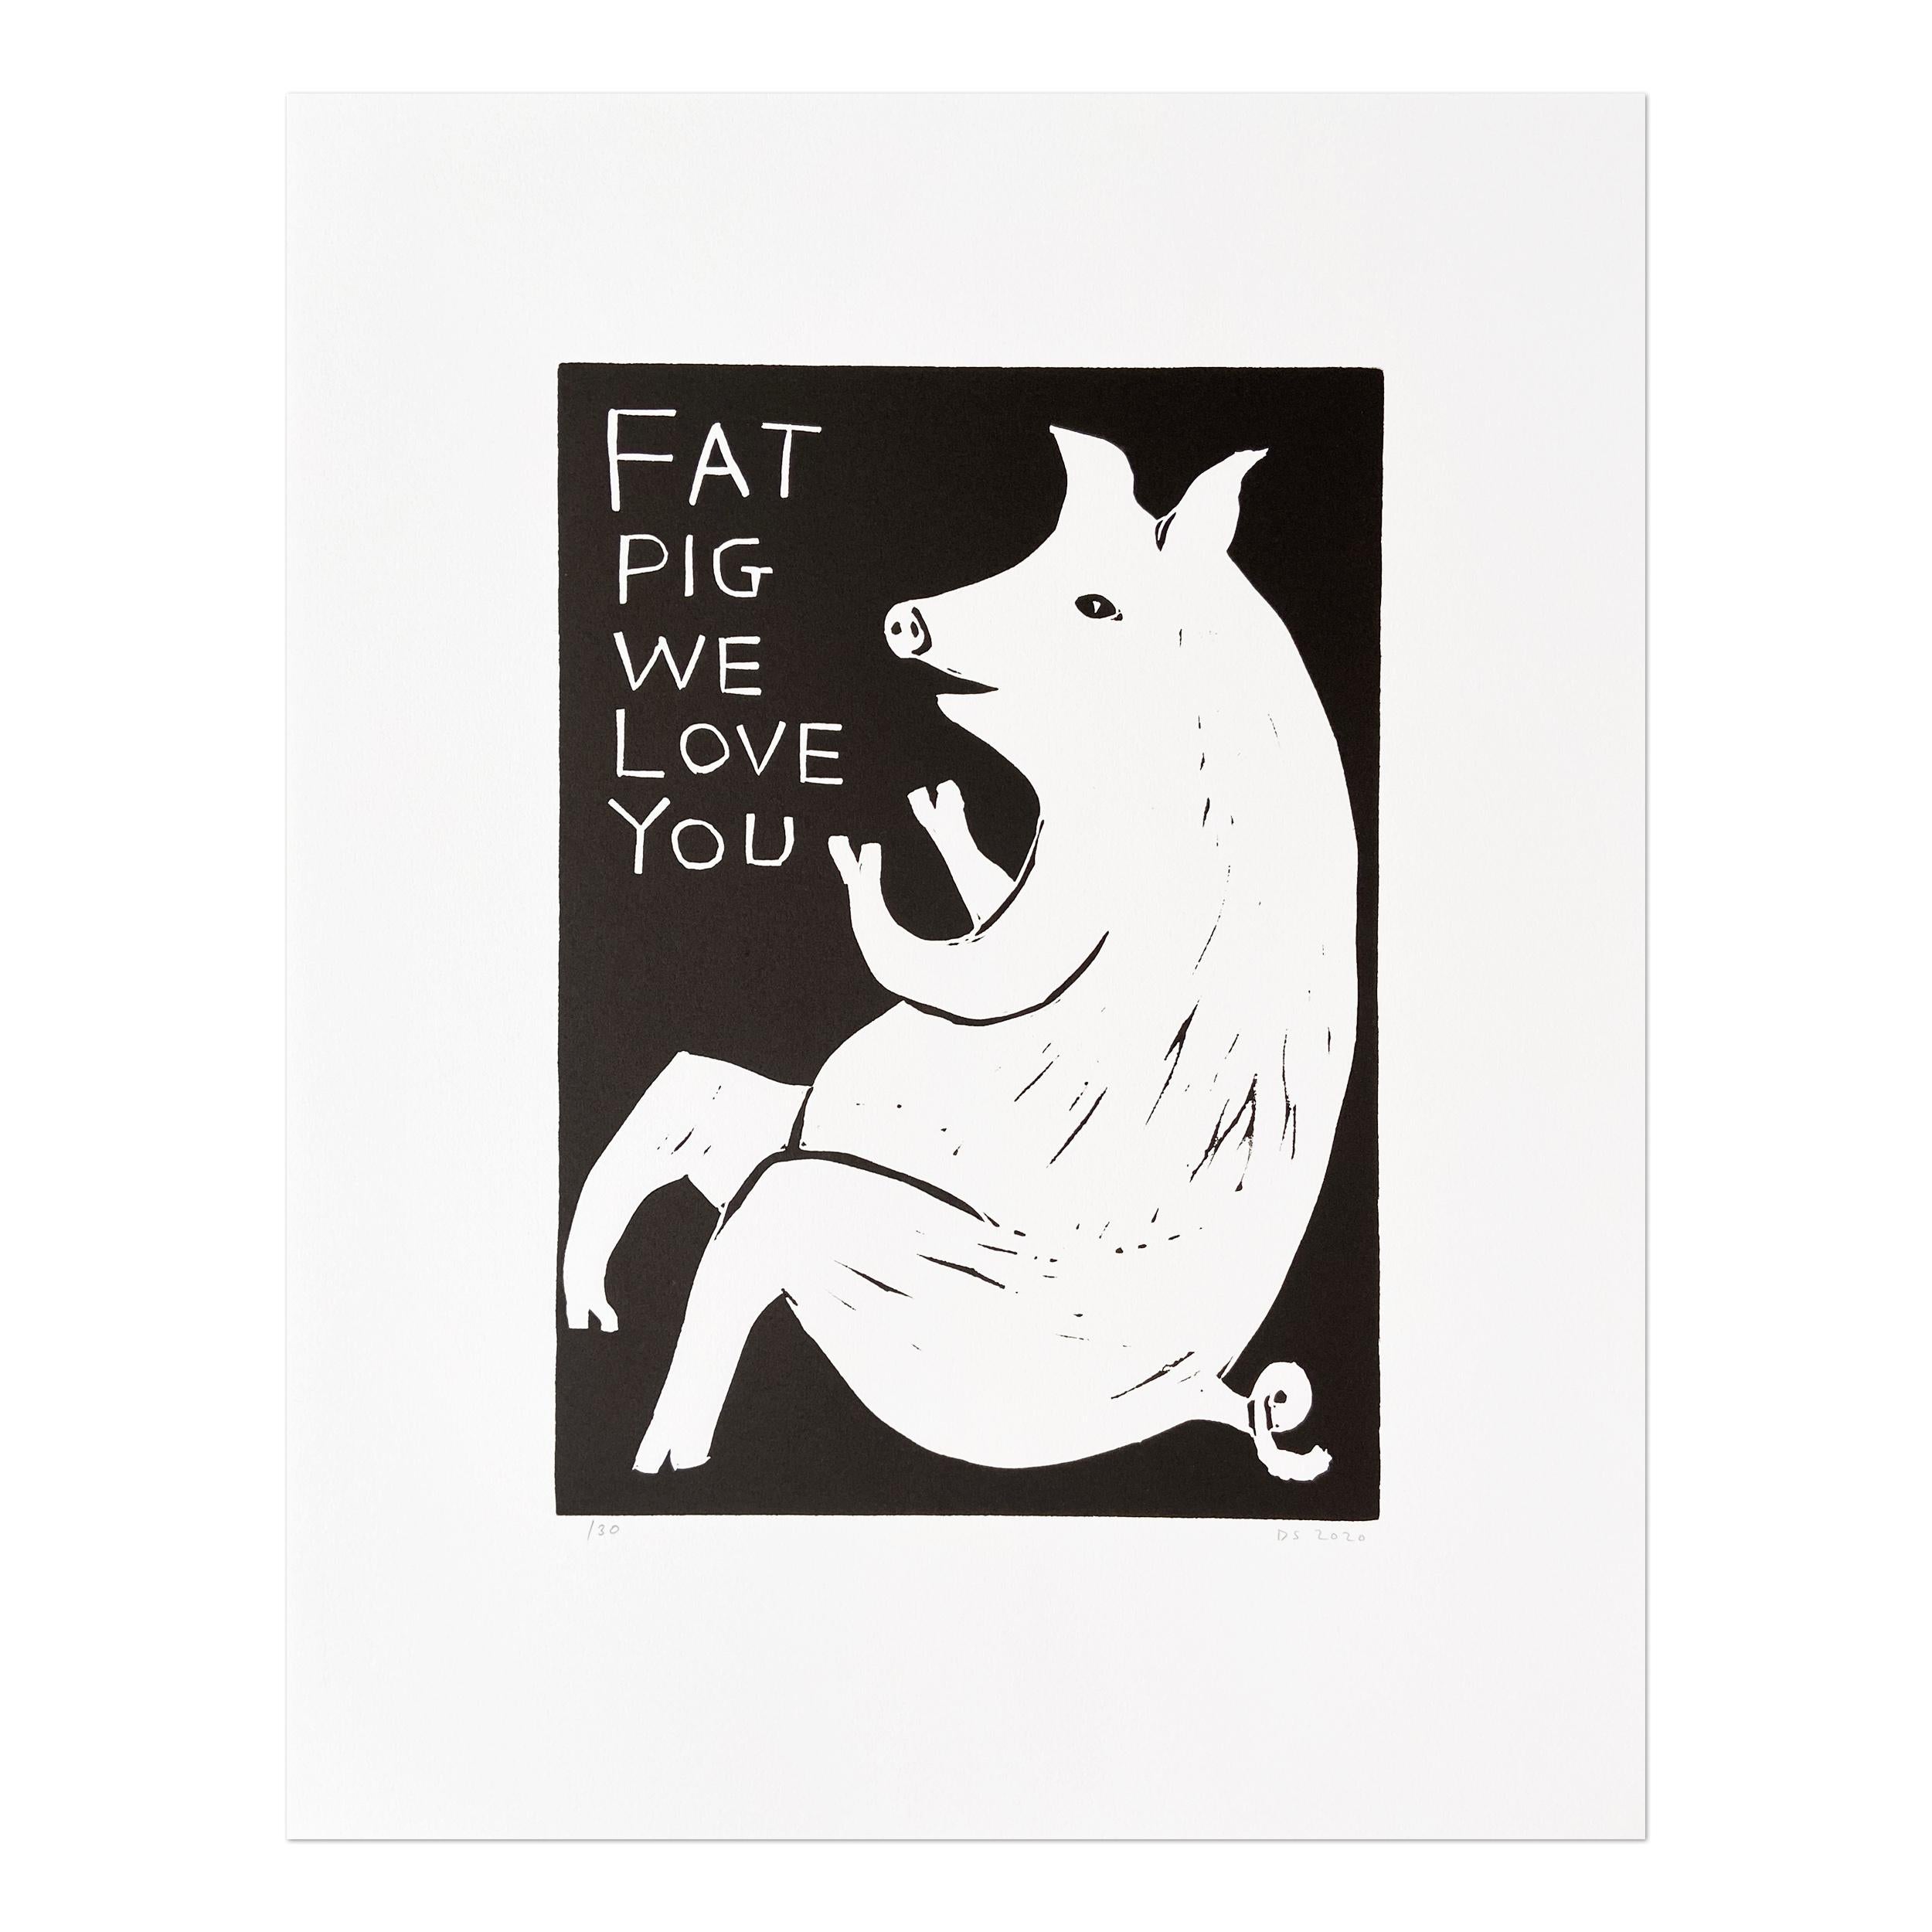 David Shrigley (British, b. 1968)´
Fat Pig We Love You, 2020
Medium: Linocut on wove paper
Dimensions: 45 x 35 cm
Edition of 30: Hand signed and numbered in pencil
Condition: Mint